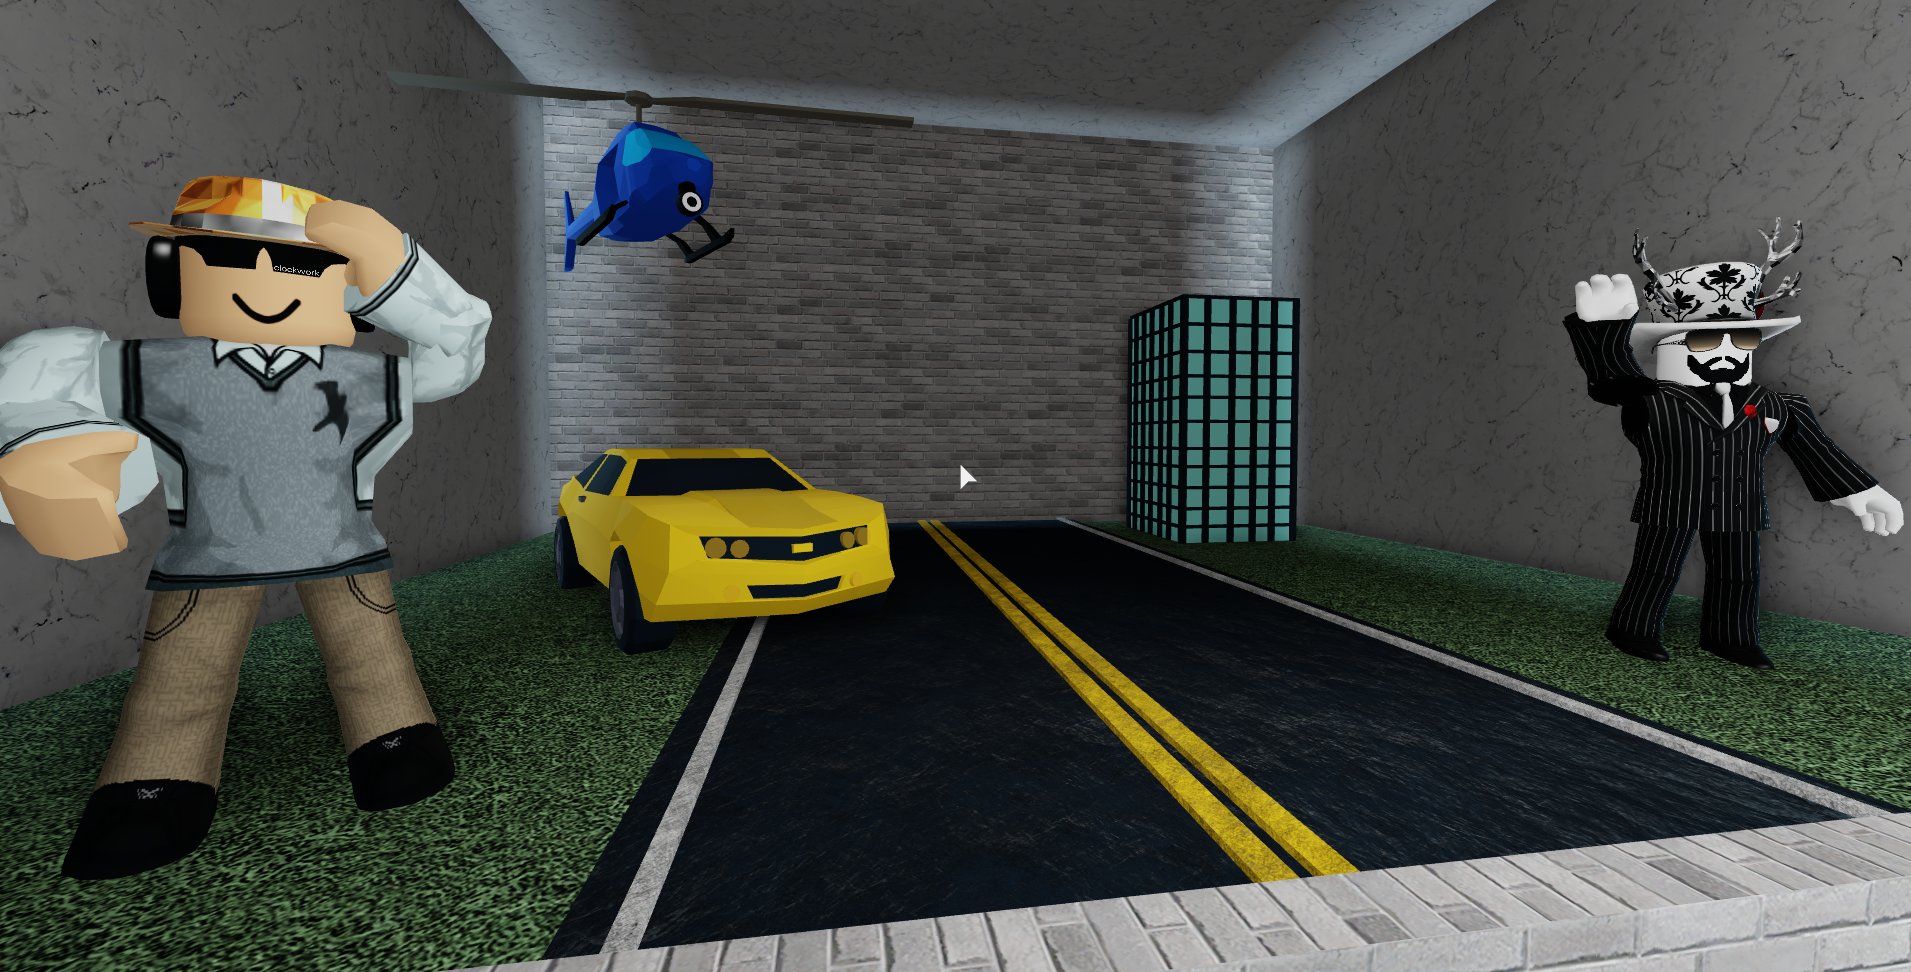 Coidism On Twitter 4 New Exhibits Added To The Gallery Today Myth Community The6njm 1ik Upcoming Developer Jammez 32bitpc Top Developers Asimo3089 Badccvoid Expect A History Section To Be Added To The - roblox myths lexus